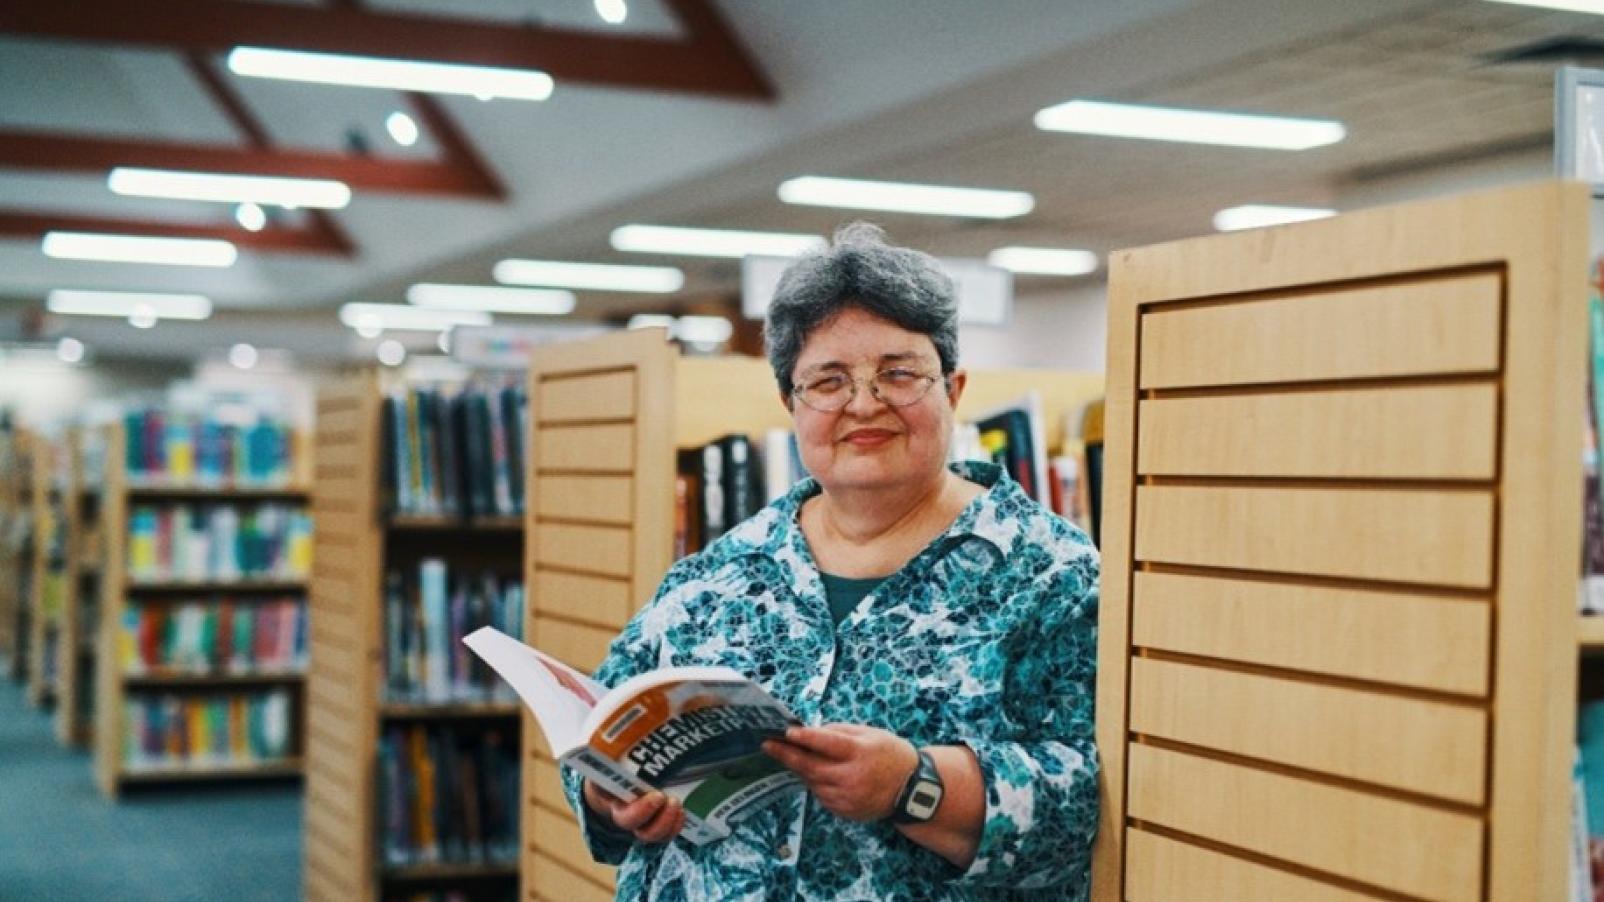 A woman standing in a library holding a book and smiling at the camera